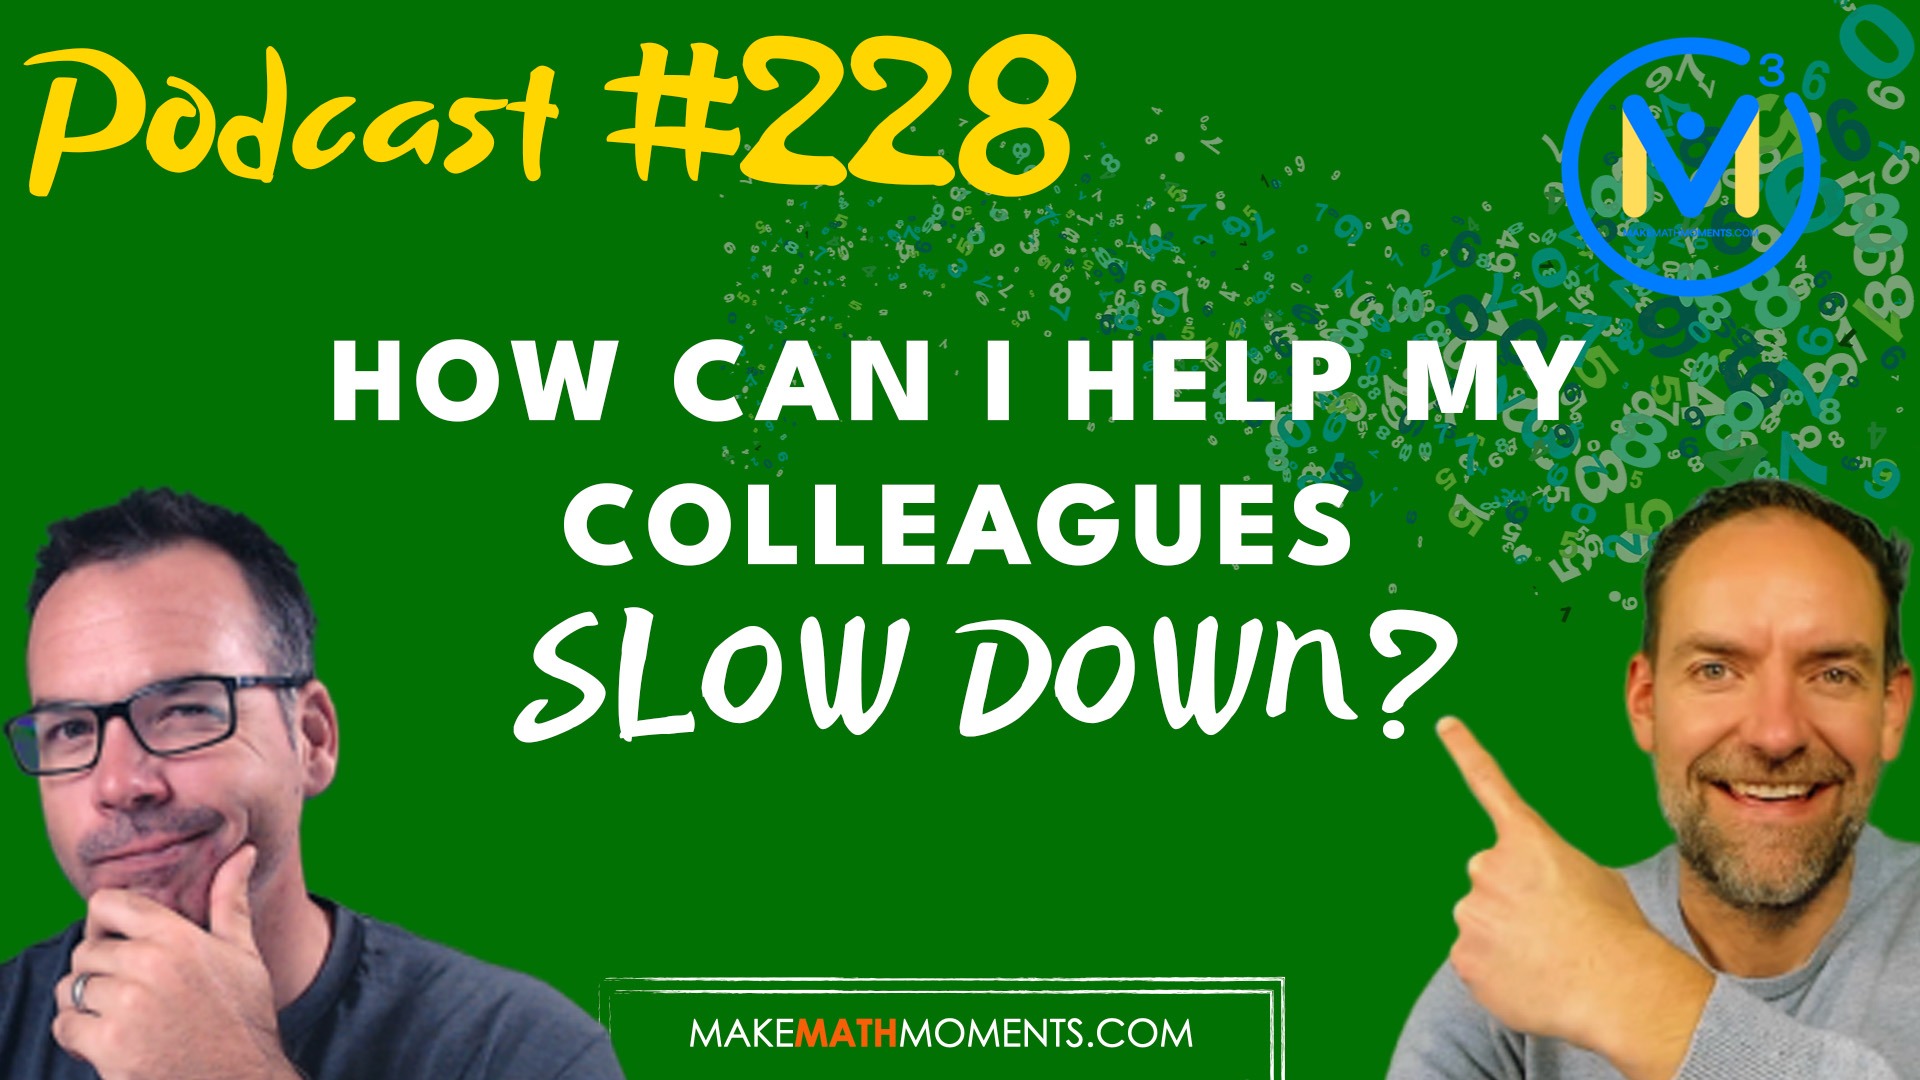 Episode 228: How Can I Help My Colleagues Slow Down? – A Math Mentoring Moment